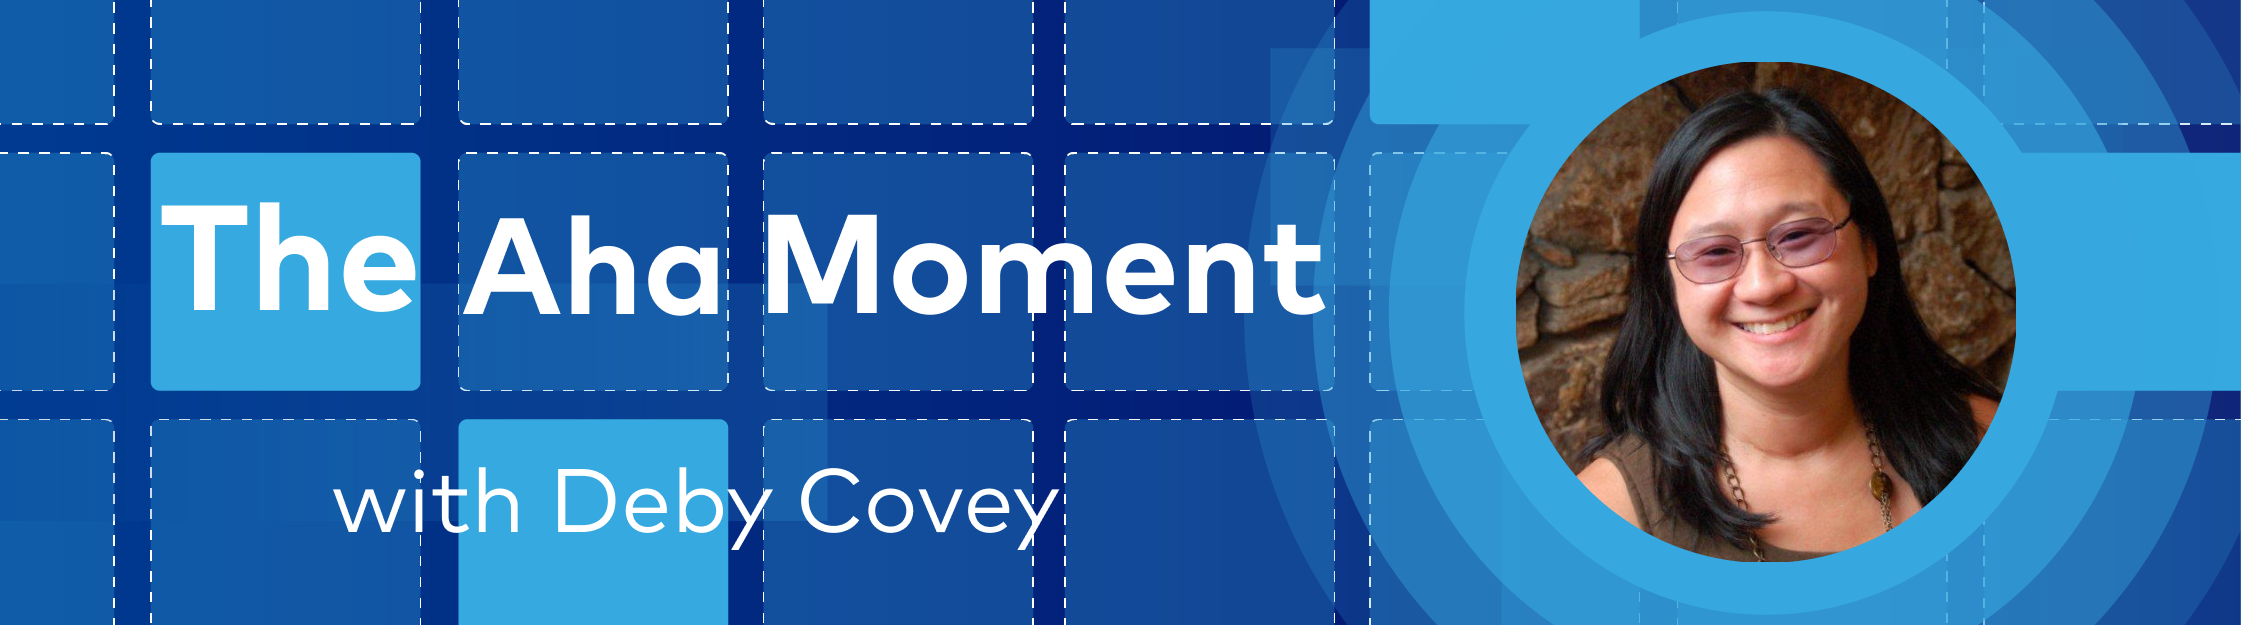 PM Influencer Series: Debby Covey